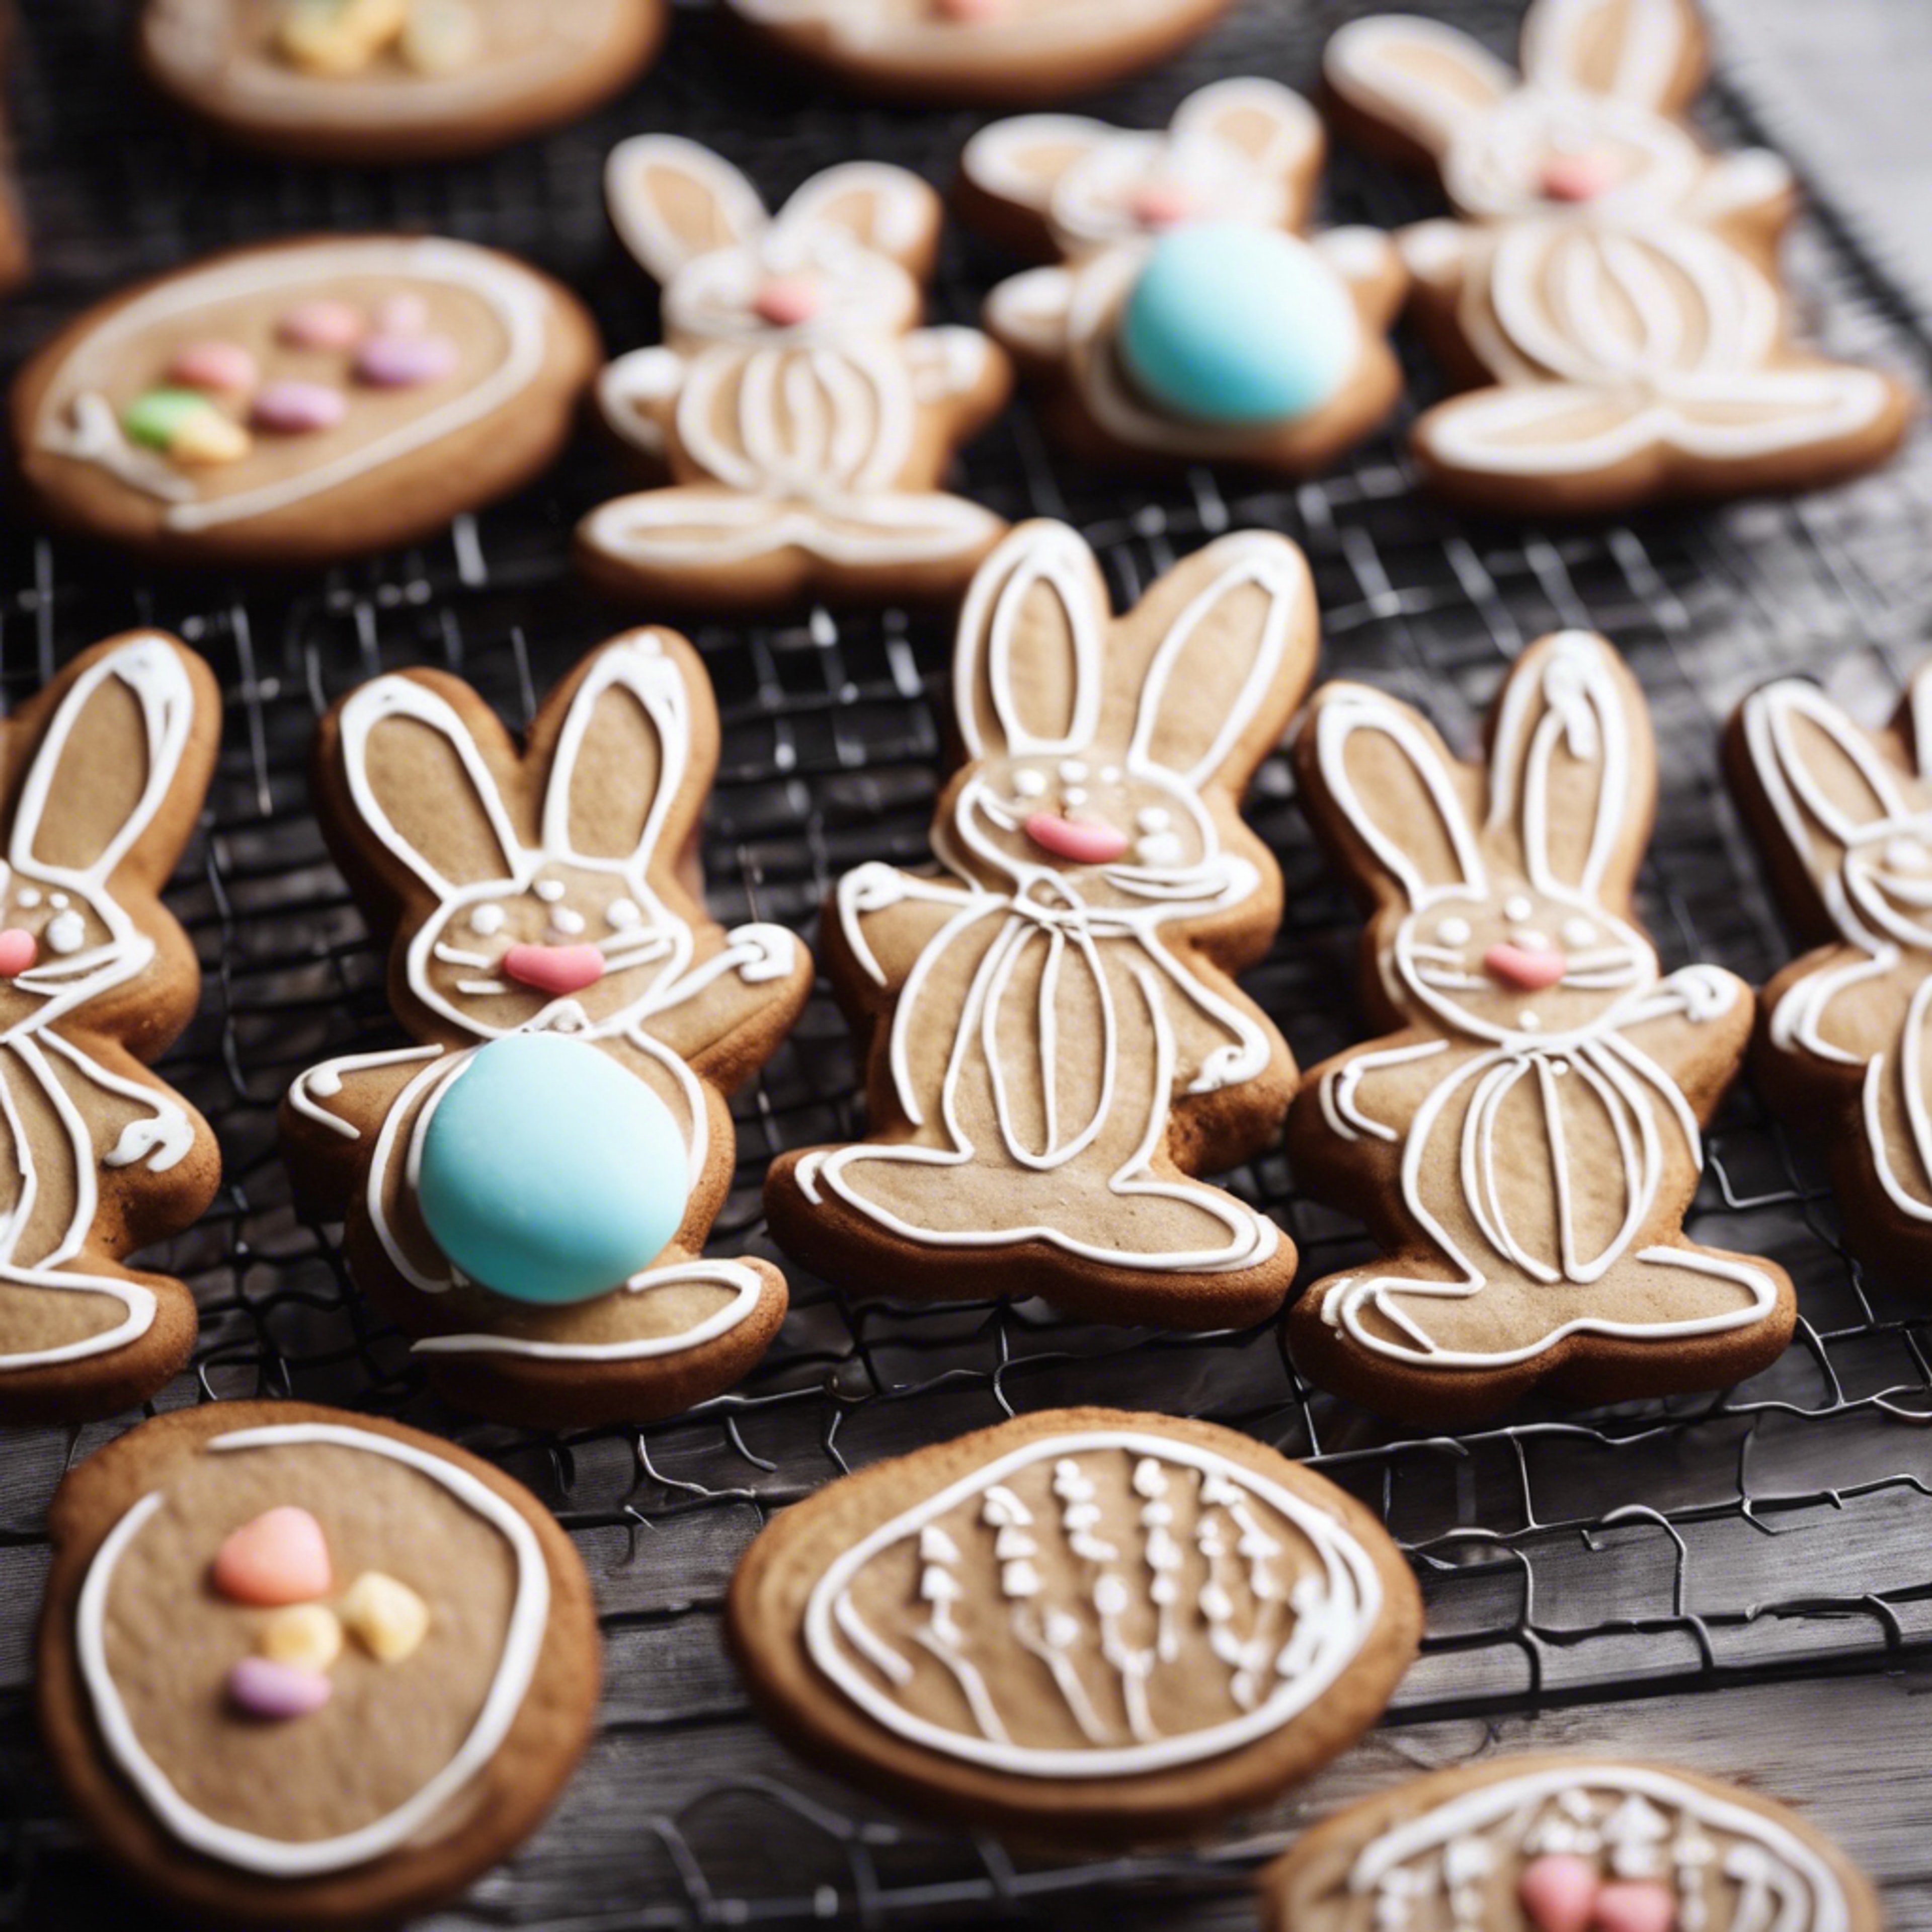 Homemade gingerbread cookies shaped like Easter bunnies and eggs, cooling on a rack. Tapet[c62694eb033d400aa62f]